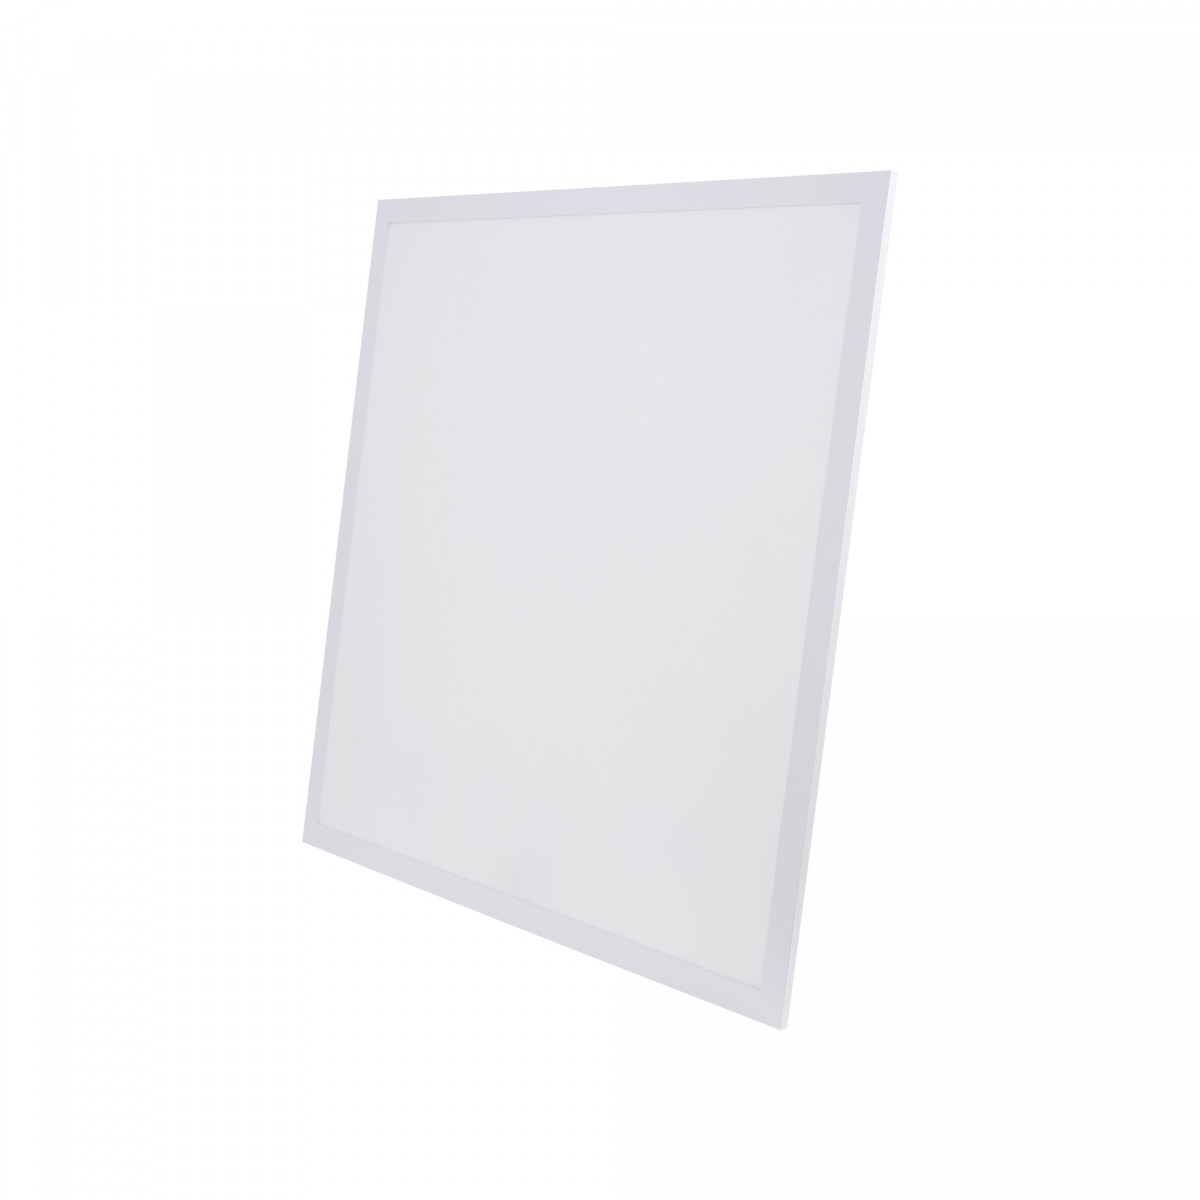 Panel LED empotrable Backlight CCT 60x60cm - 30W - 125lm/W - IP65